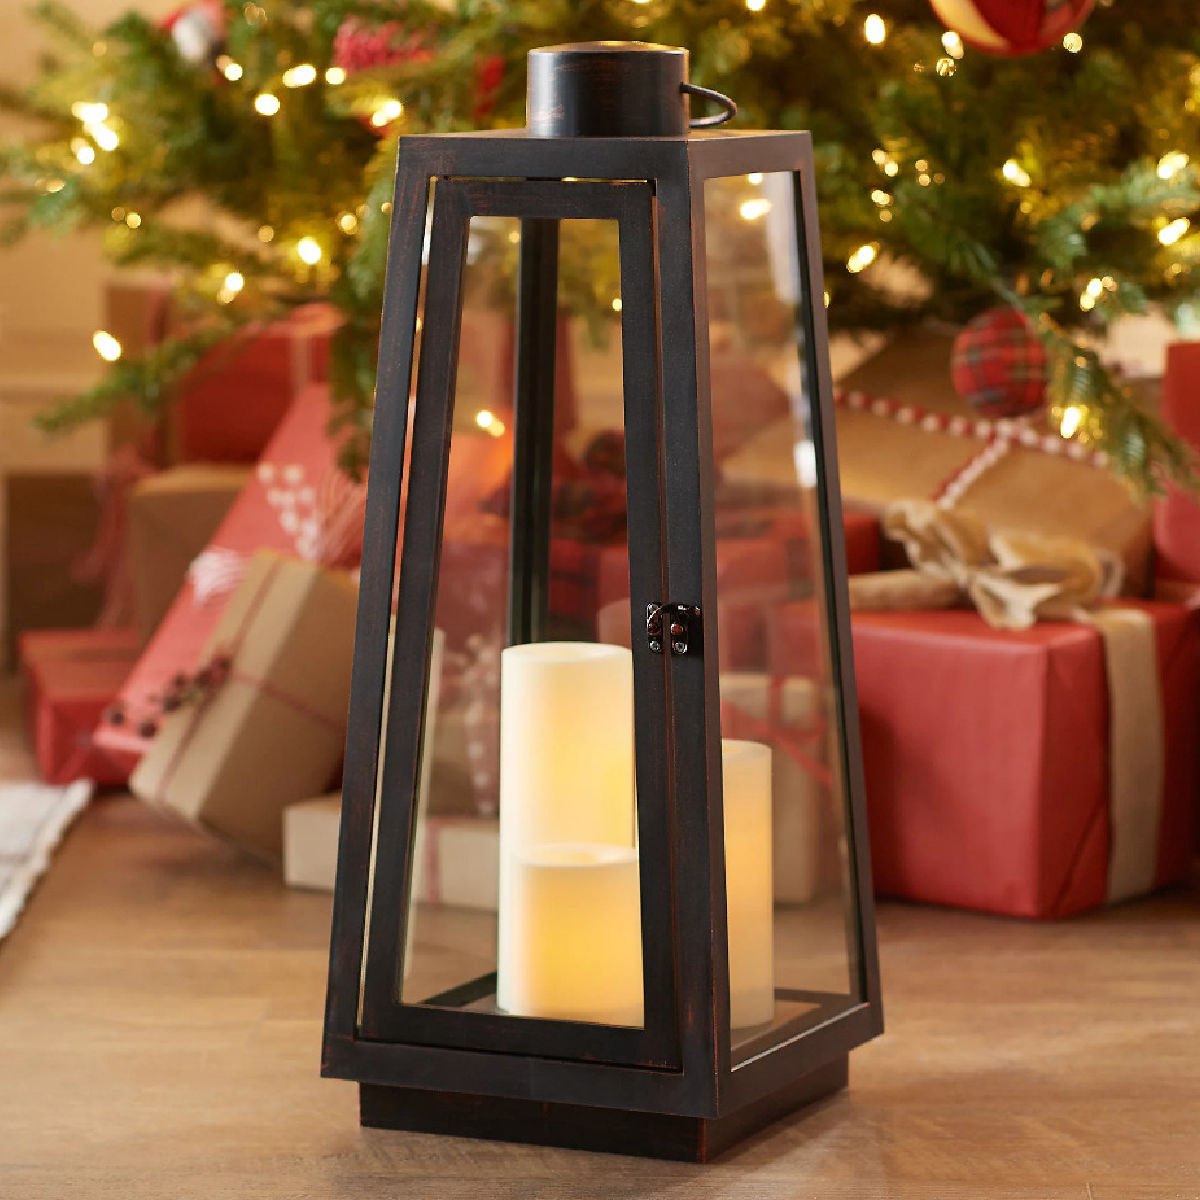 Candle Impressions 23-Inch Indoor Outdoor Tapered Lantern